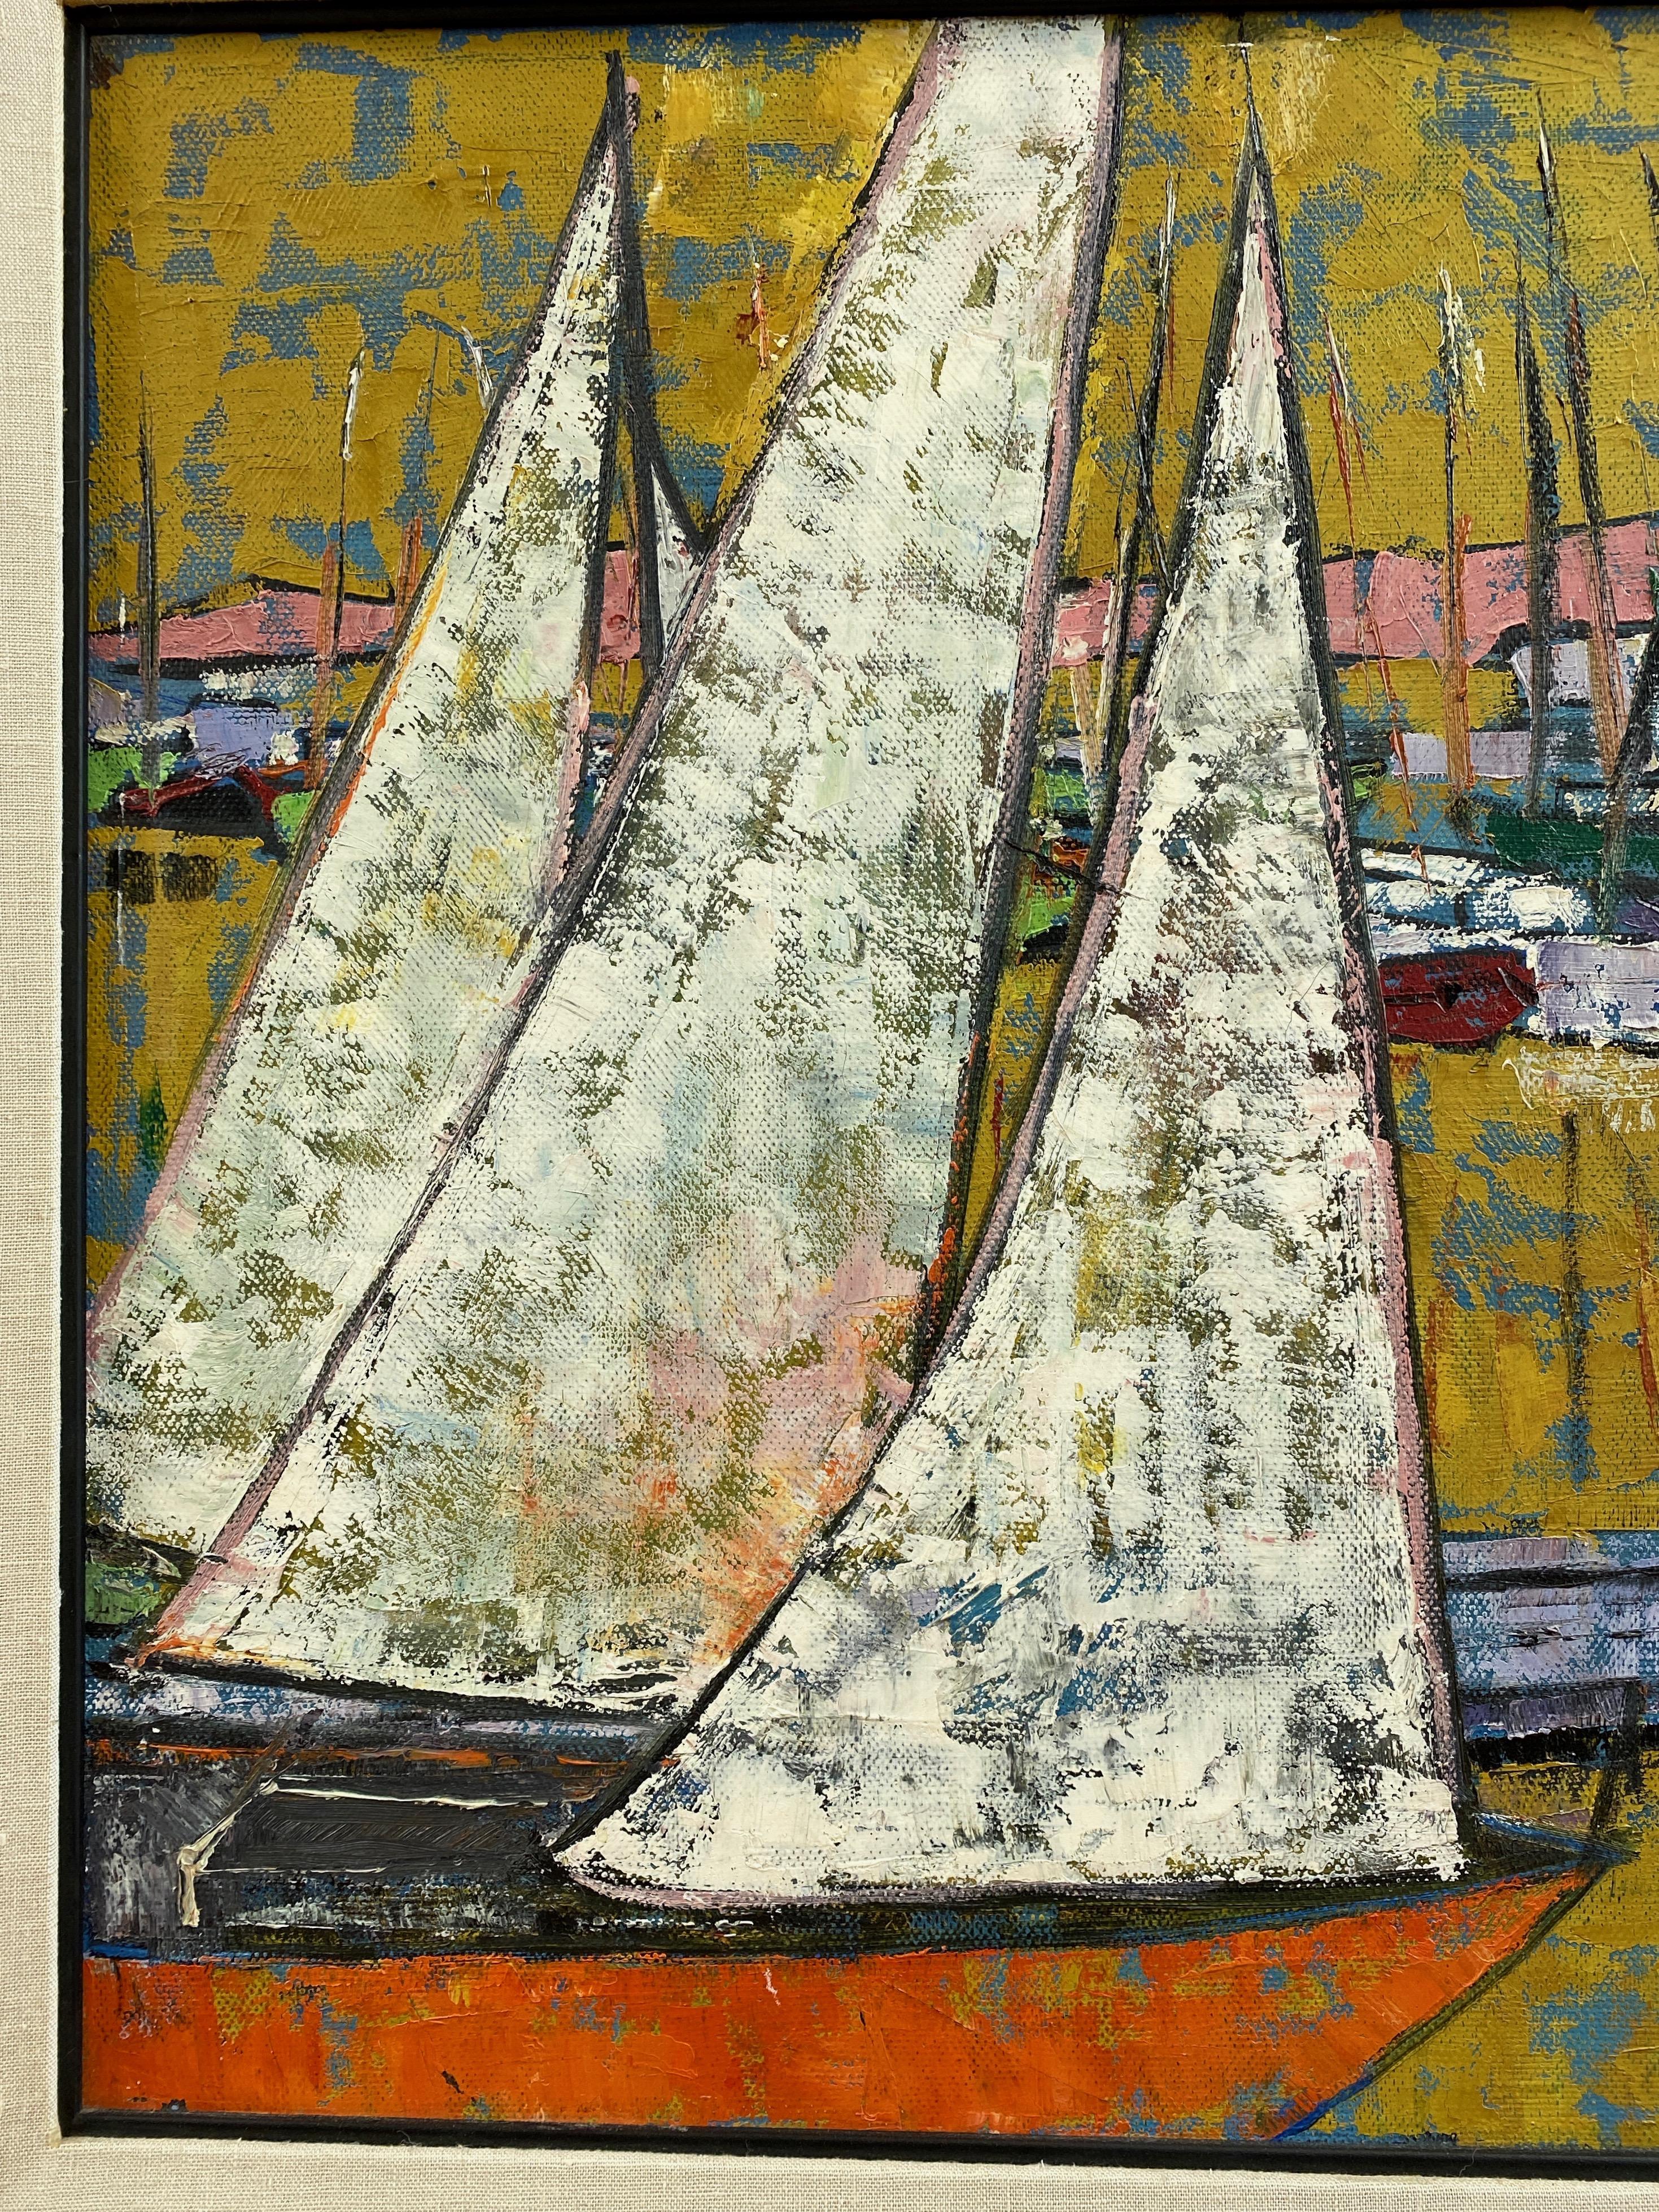 Mid-20th Century Hutchinson “Boats in Harbor”, Expressionist Acrylic Painting, 1950s